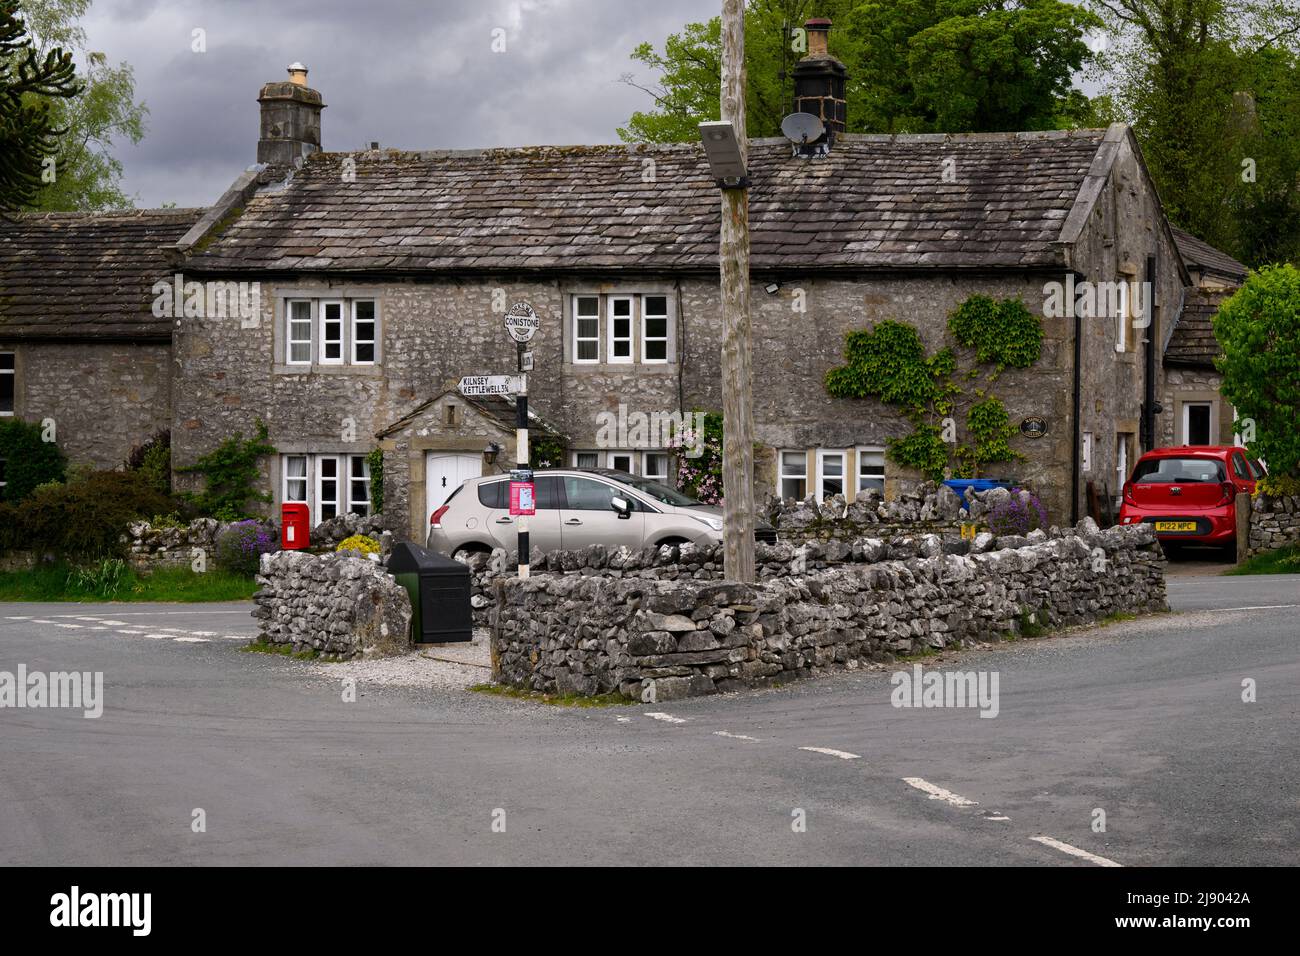 Quiet Conistone village centre (attractive C18 stone properties, walled road junction, signpost pointing) - Wharfedale, Yorkshire Dales, England, UK. Stock Photo